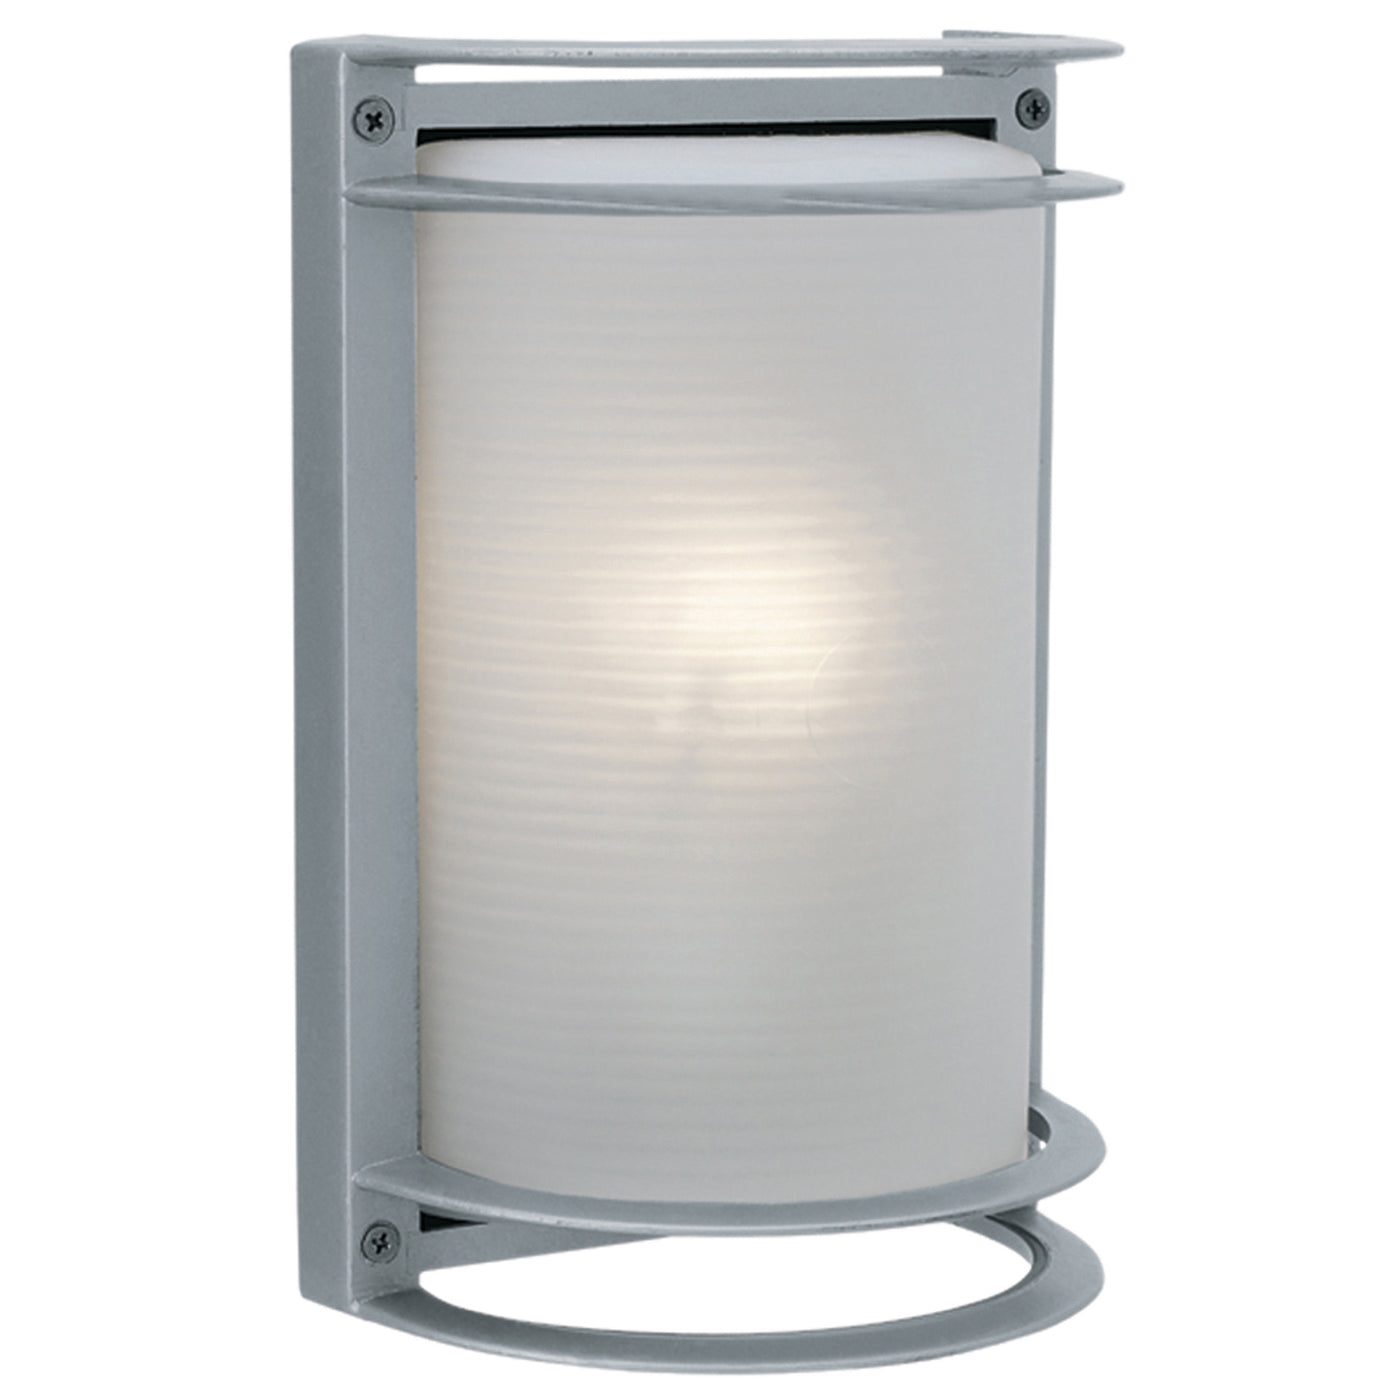 1 Light 10.5" Outdoor Wall Light, 60W, 120V, Satin, Nevis Collection